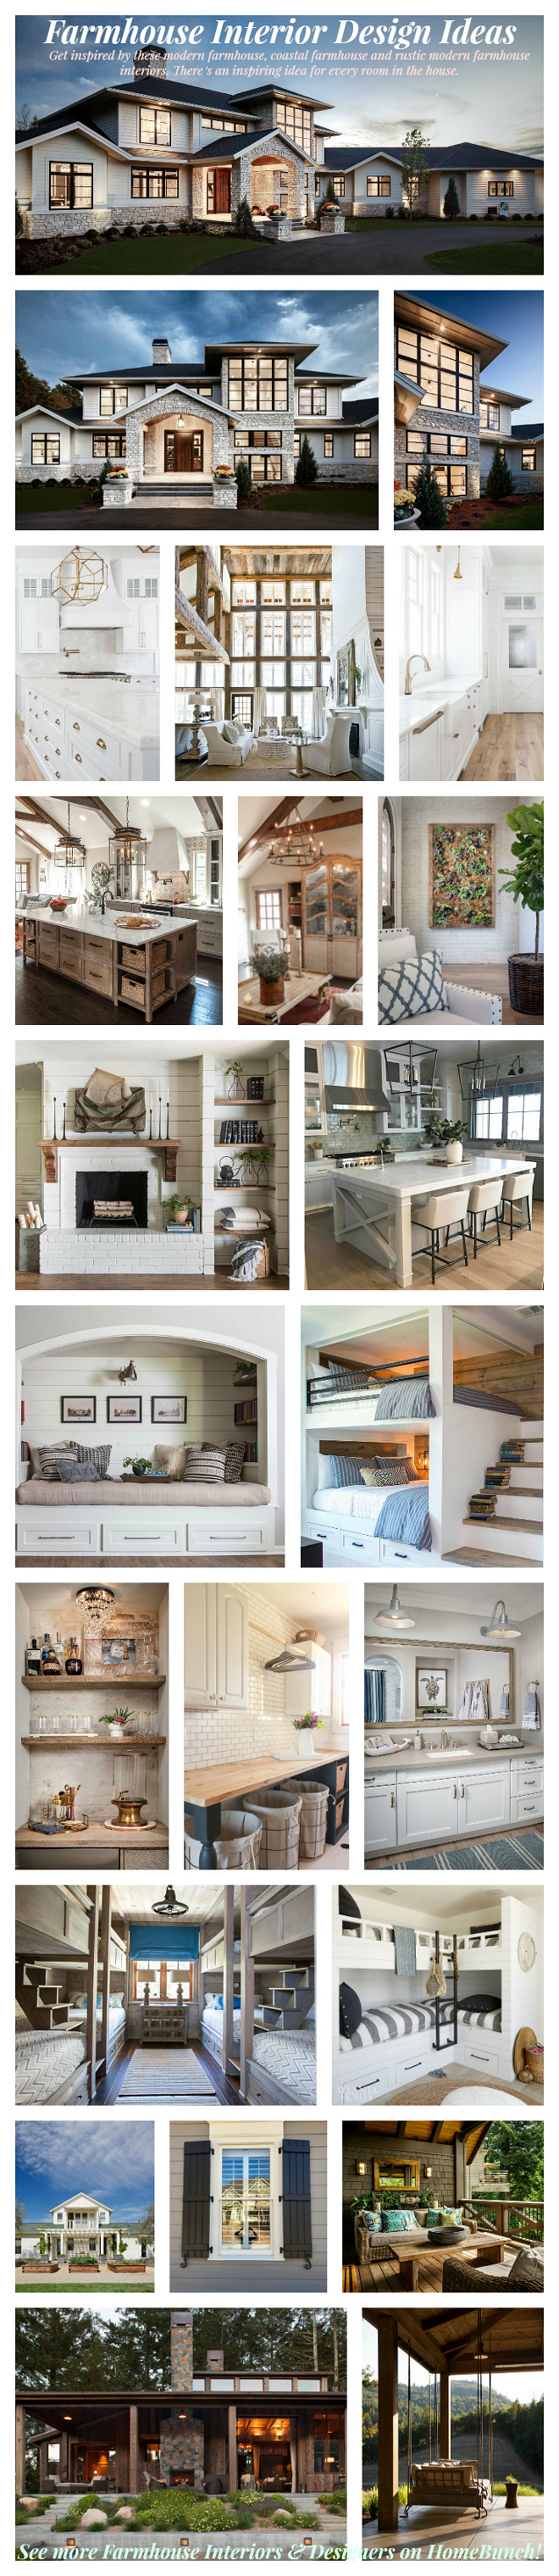 Farmhouse Interiors. Get inspired by these modern farmhouse, coastal farmhouse and rustic modern farmhouse interiors. There’s an inspiring idea for every room in the house. #Farmhouse #FarmhouseInteriors #coastalFarmhouse #modernFarmhouse #rusticFarmhouse